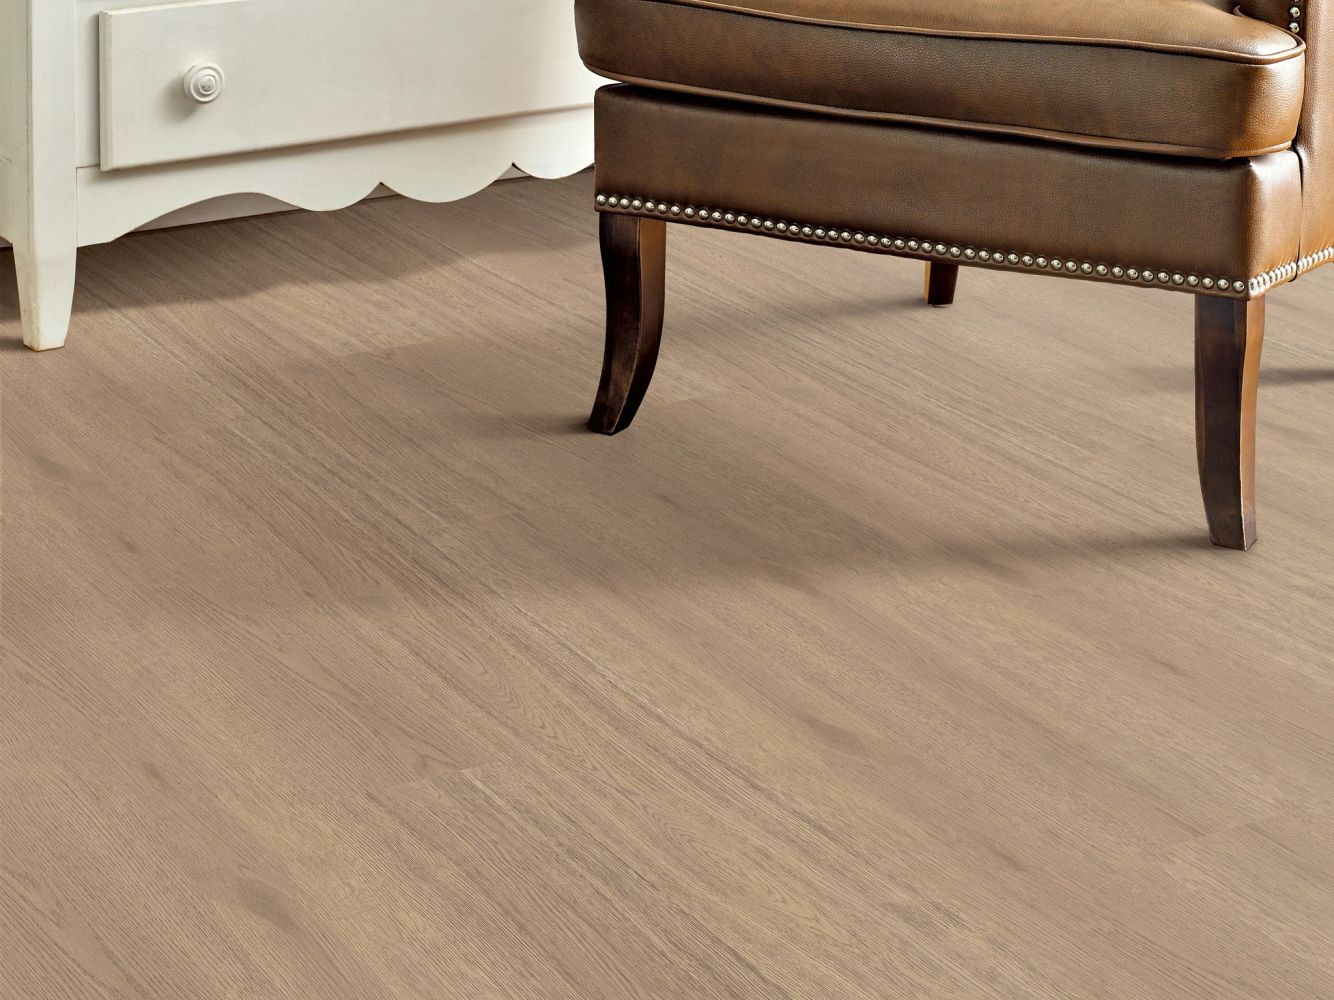 Shaw Floors Resilient Residential Prodigy Hdr Plus Fika 07202_2038V